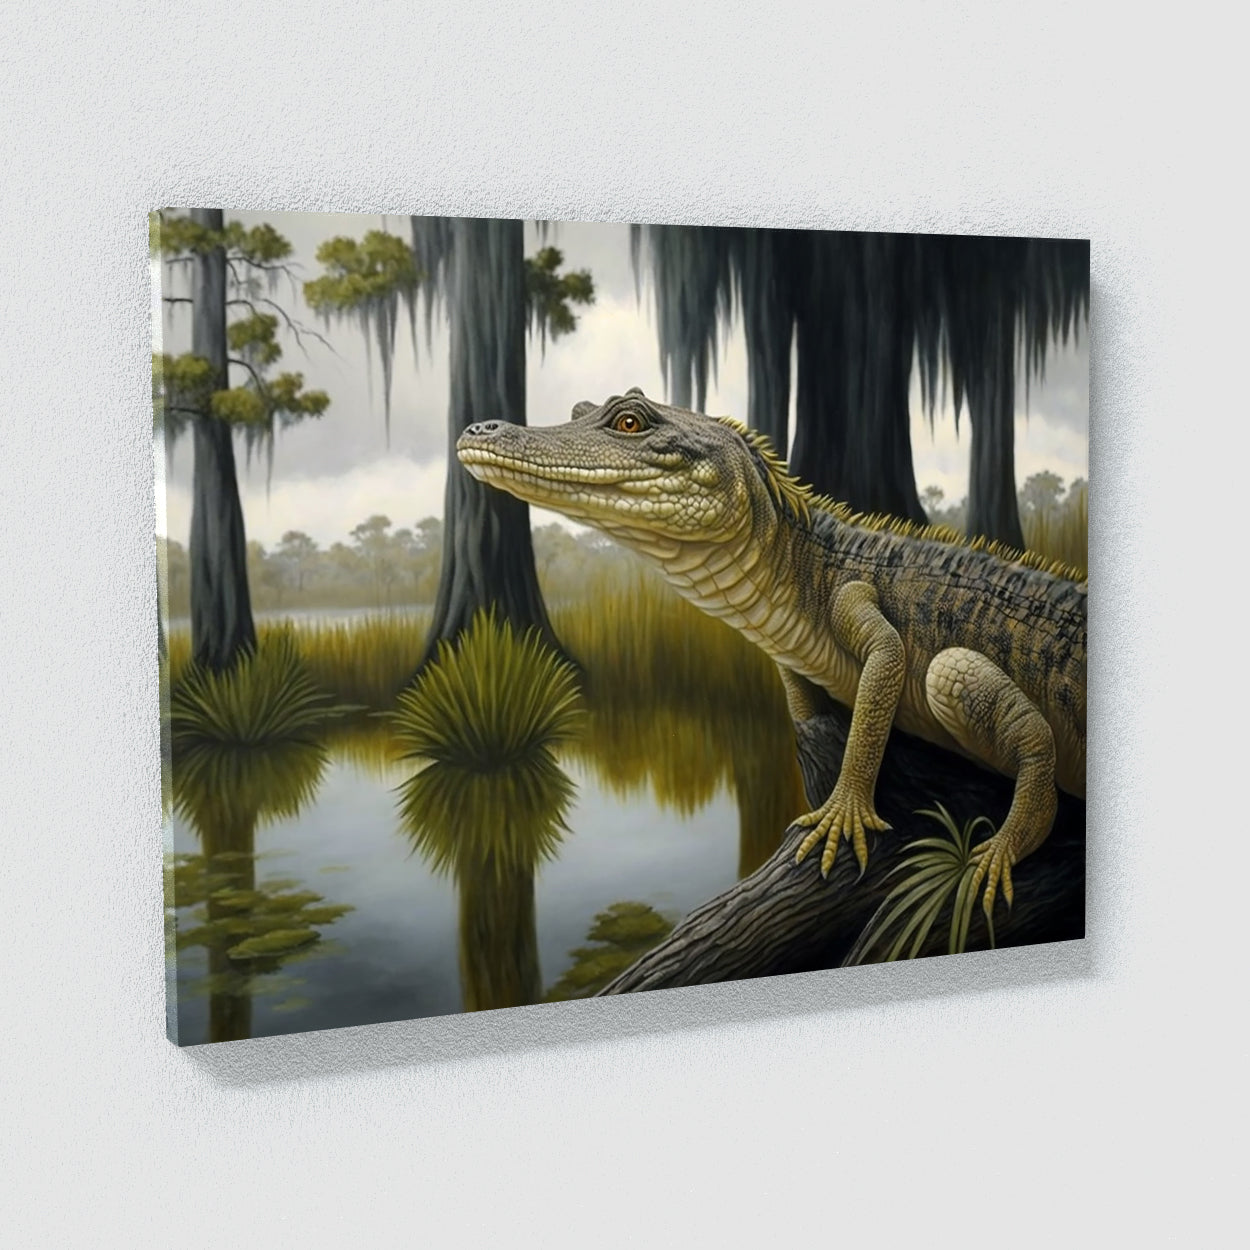 Alligator In Swamp With Trees 6 Canvas Wall Art Print Decor